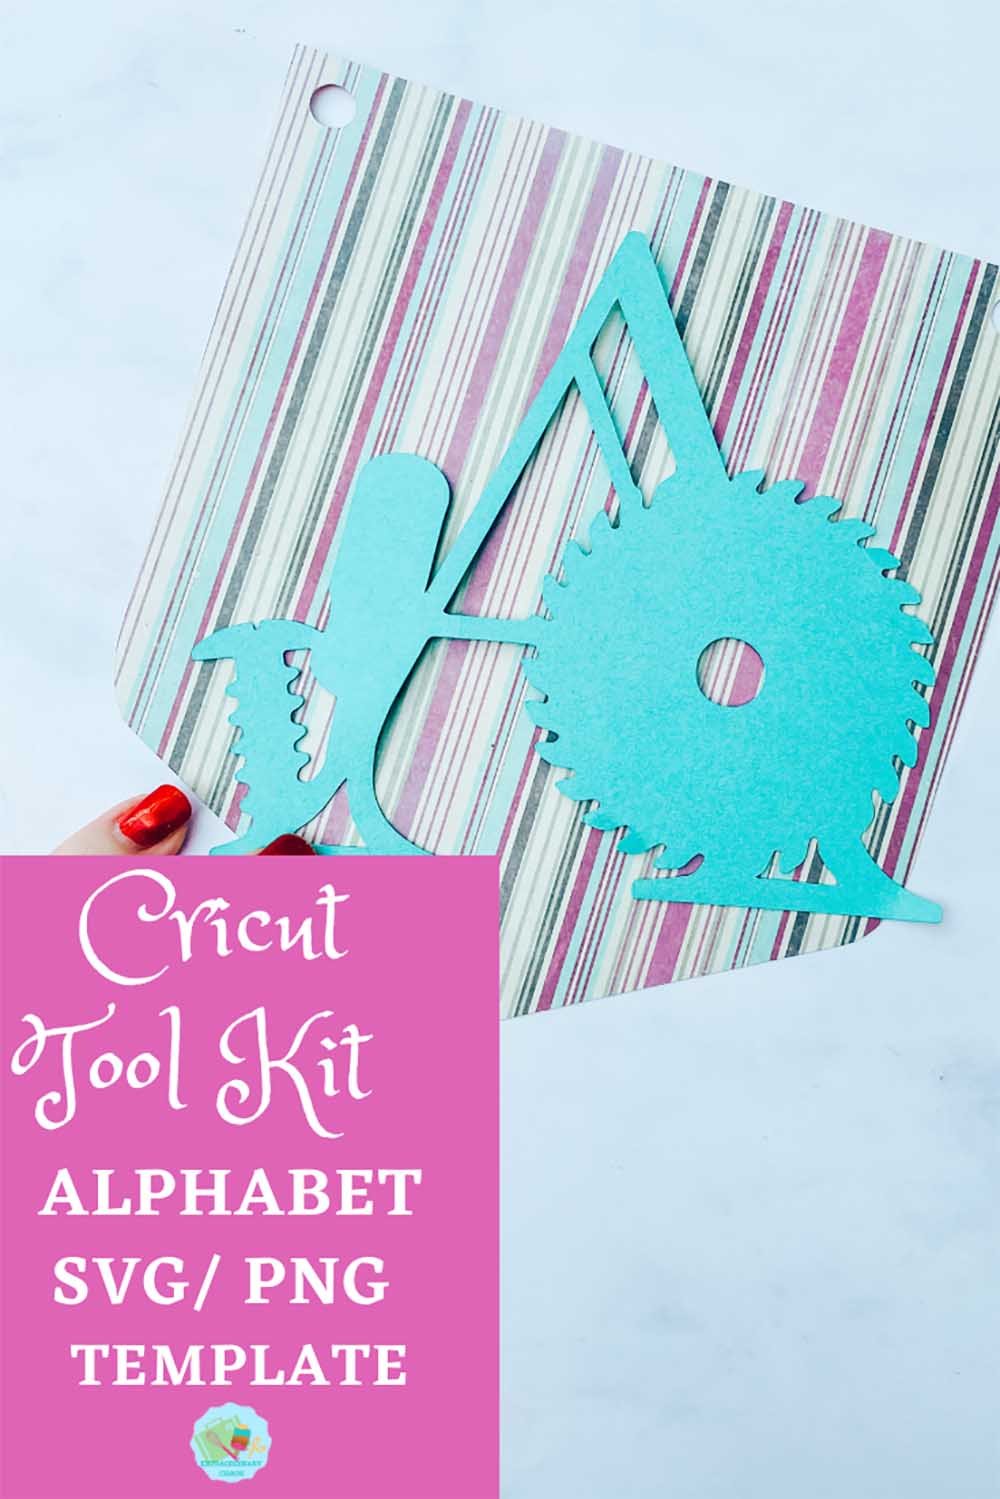 Free downloadable Cricut Tool kit alphabet and numbers for Cricut projects, card making and scrapbooking layouts-5